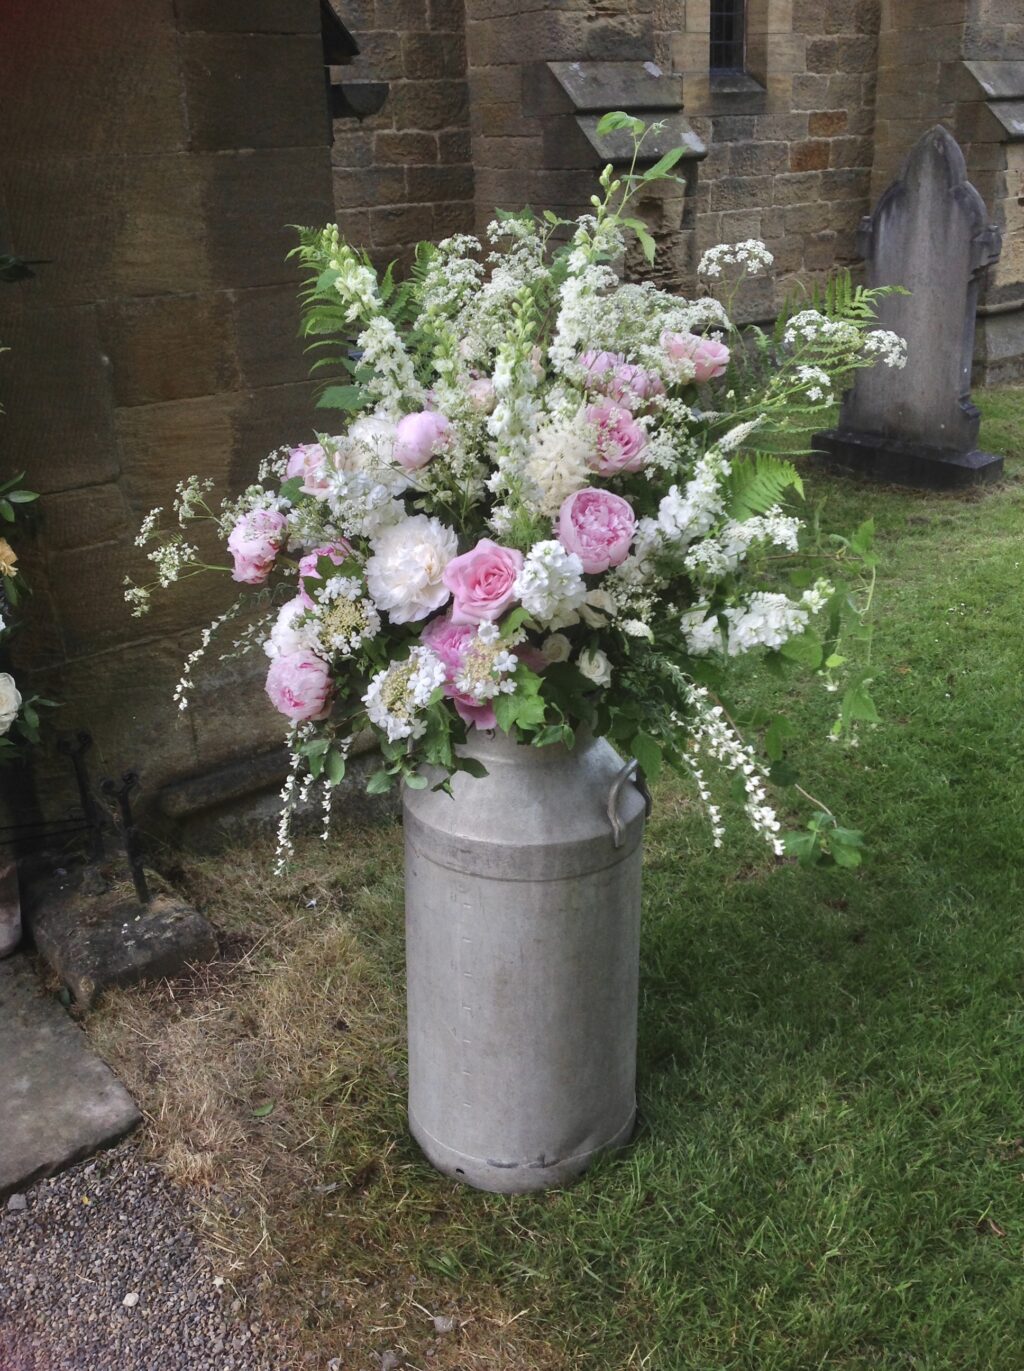 Wedding flowers - a milk churn outside the church is packed with scents from pink roses, white peonies and stocks, and overflows with frothy white cow parsley and ammi for a wildflower style church wedding